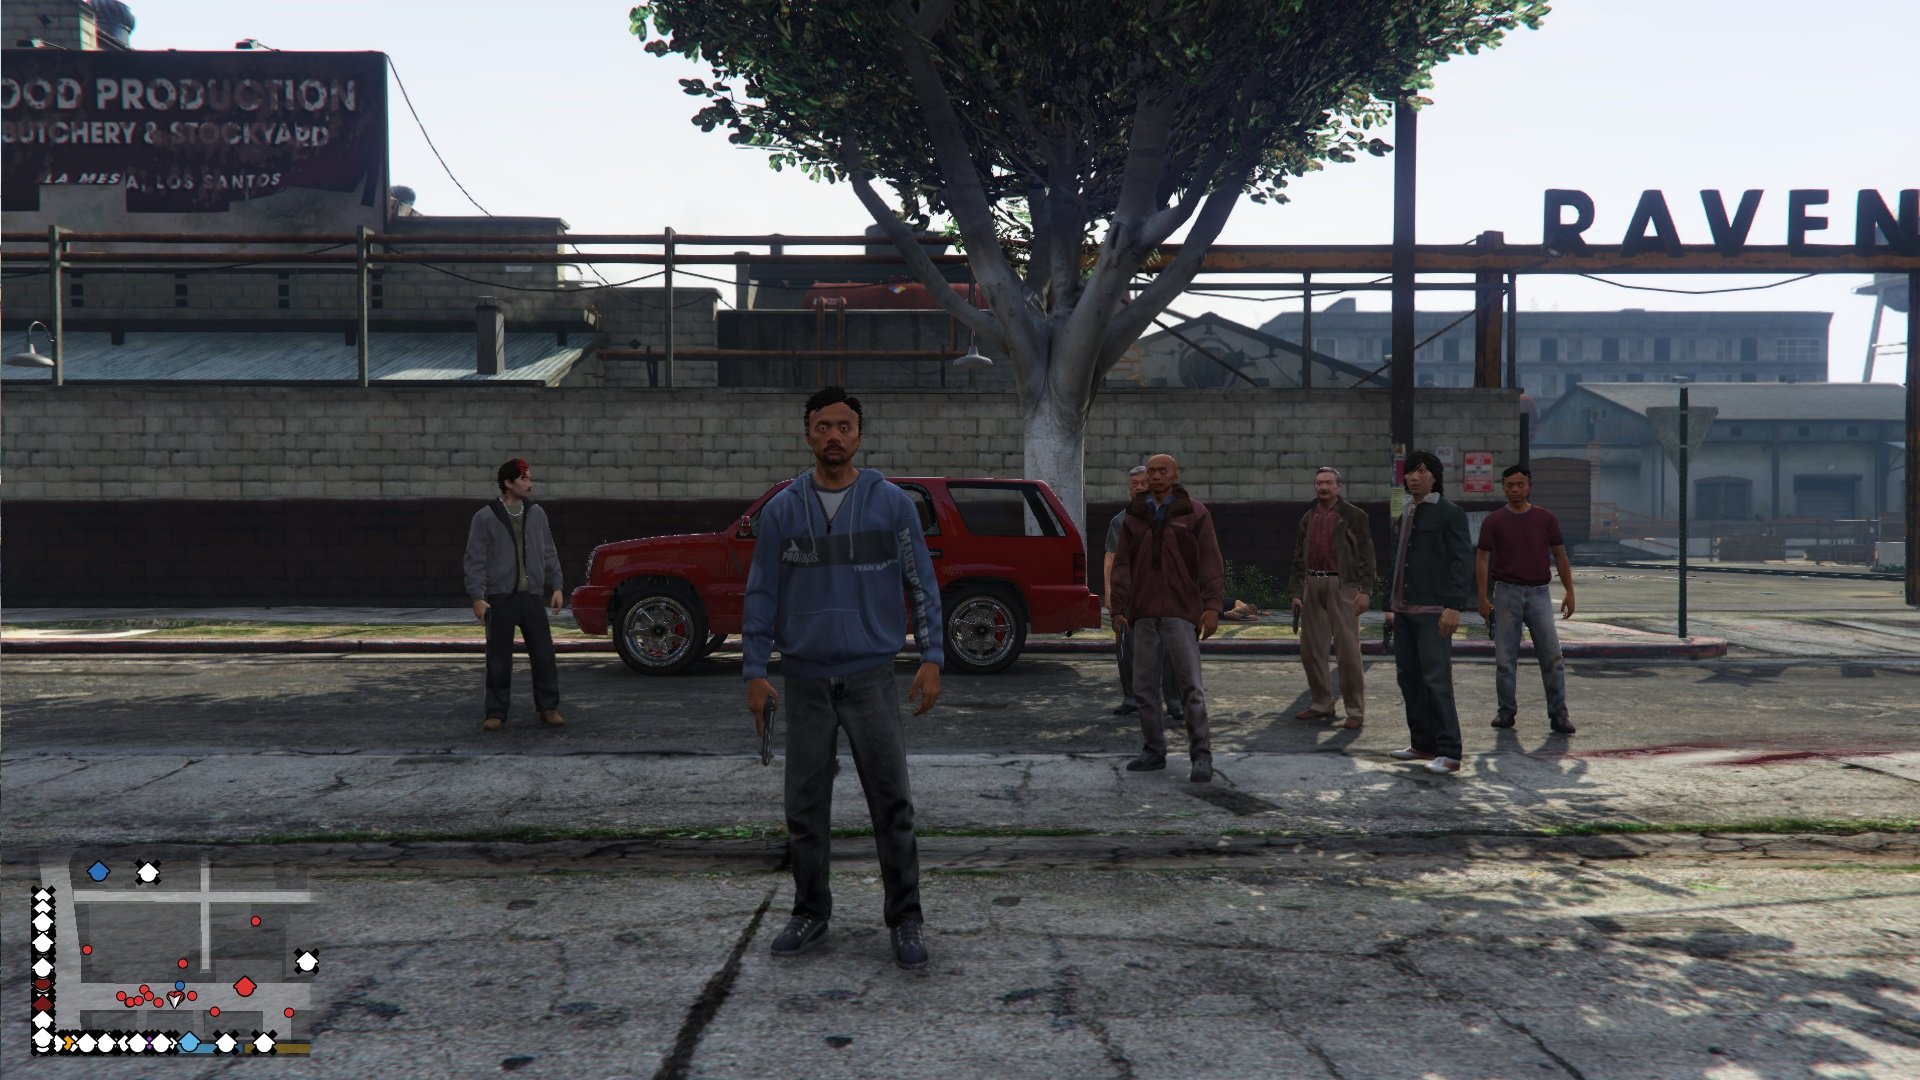 how to join a gang in gta 5 offline